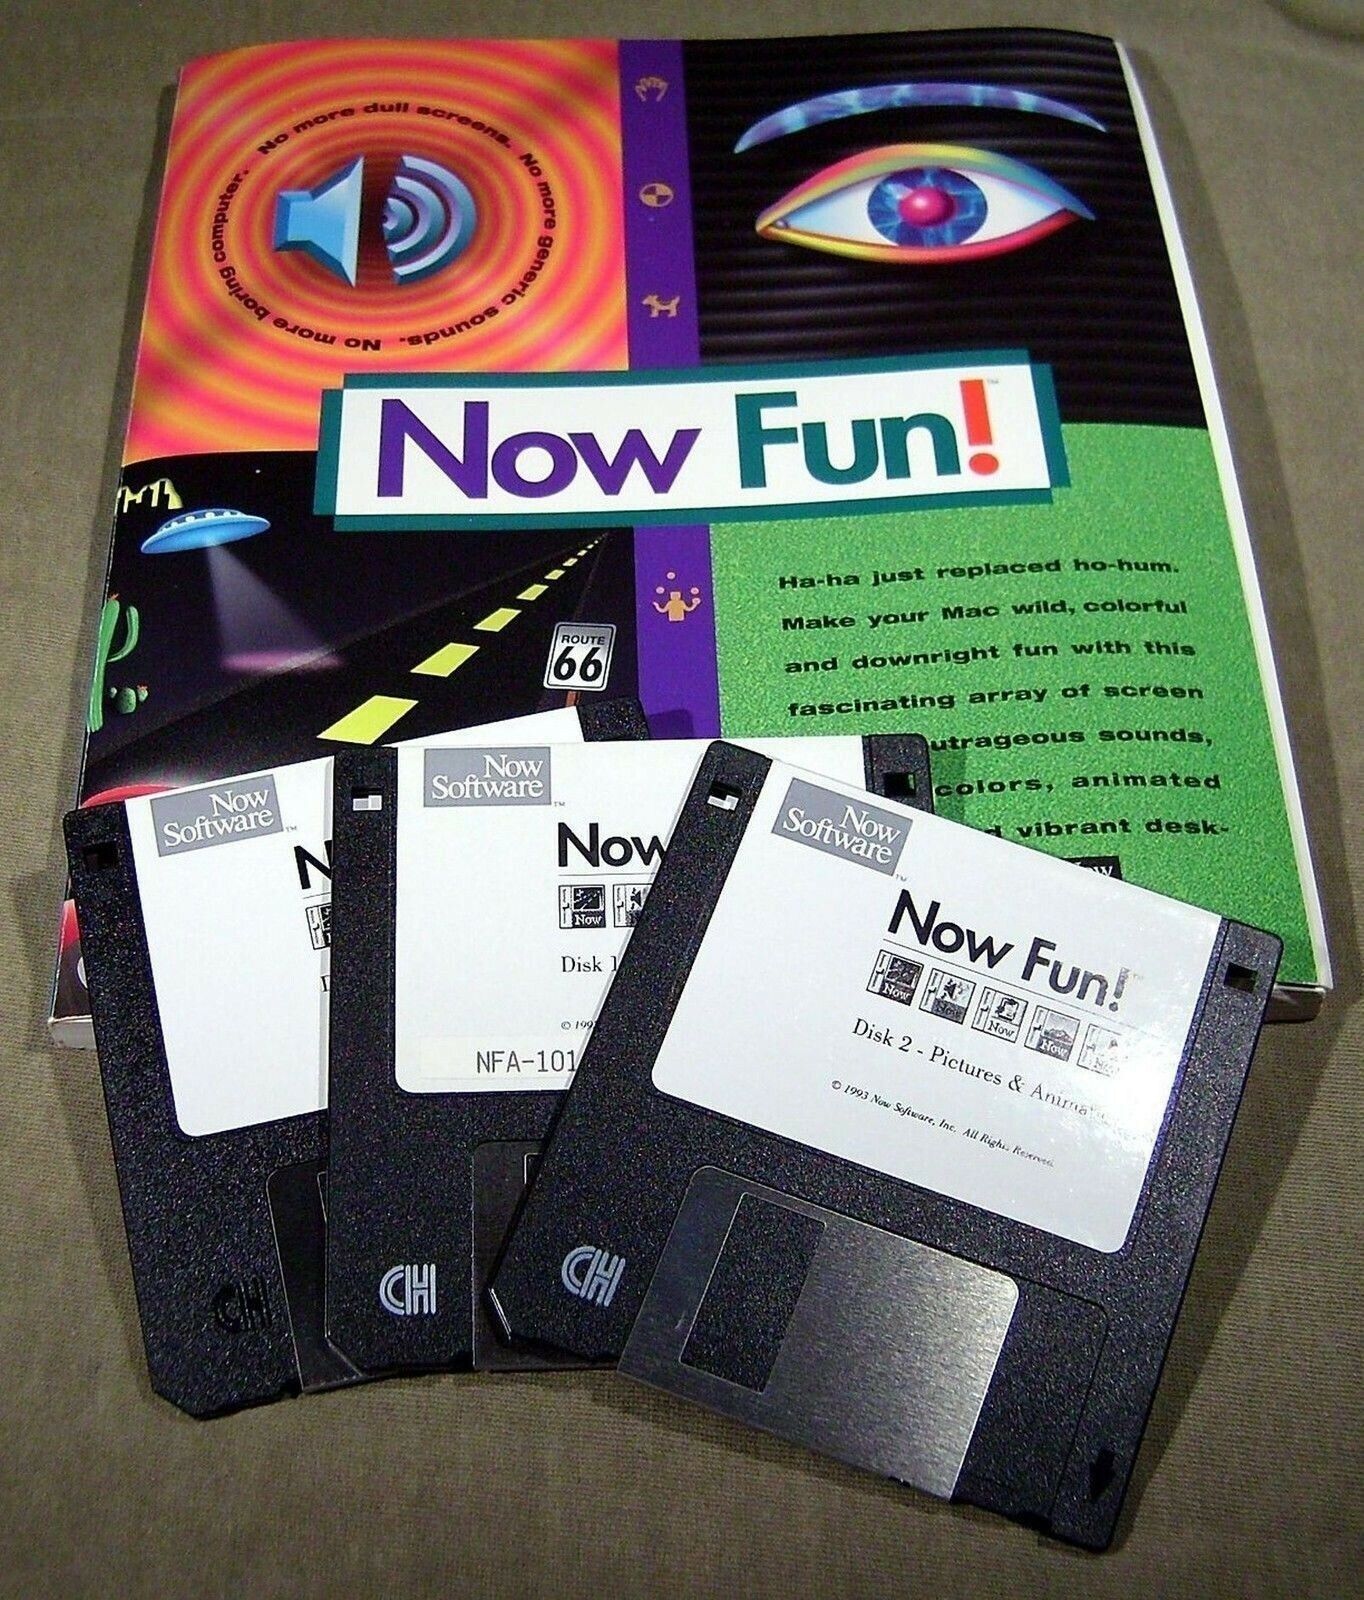 Now Fun by Now Software - Make your Mac Wild - Software - Vintage Mac